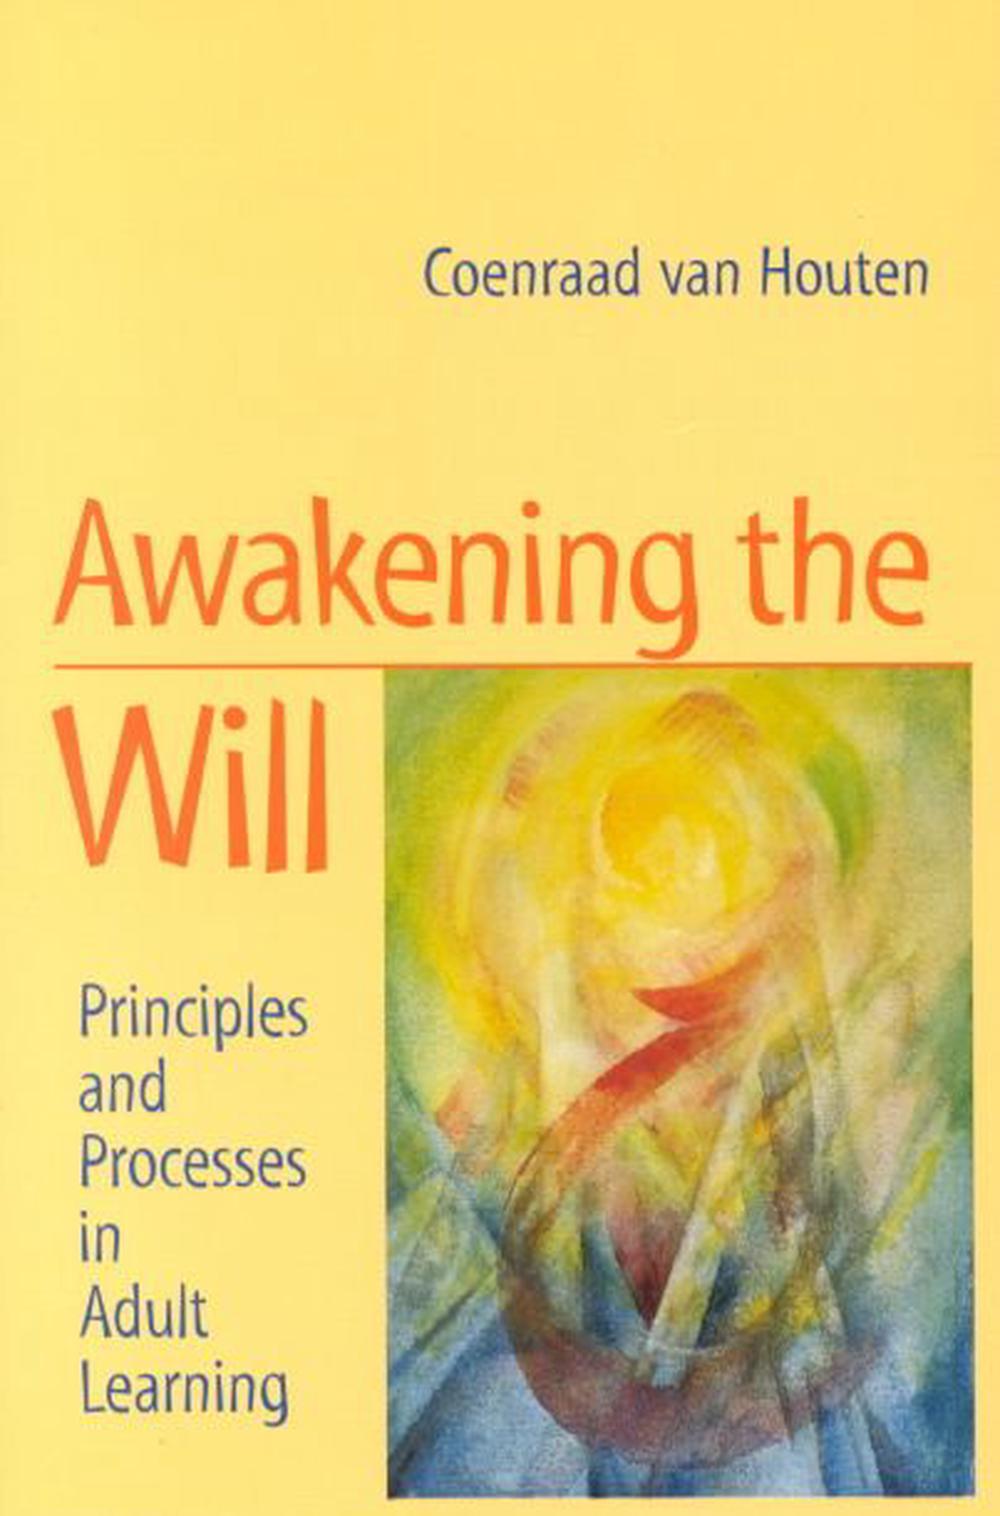 Awakening the Will Principles and Processes in Adult Learning by